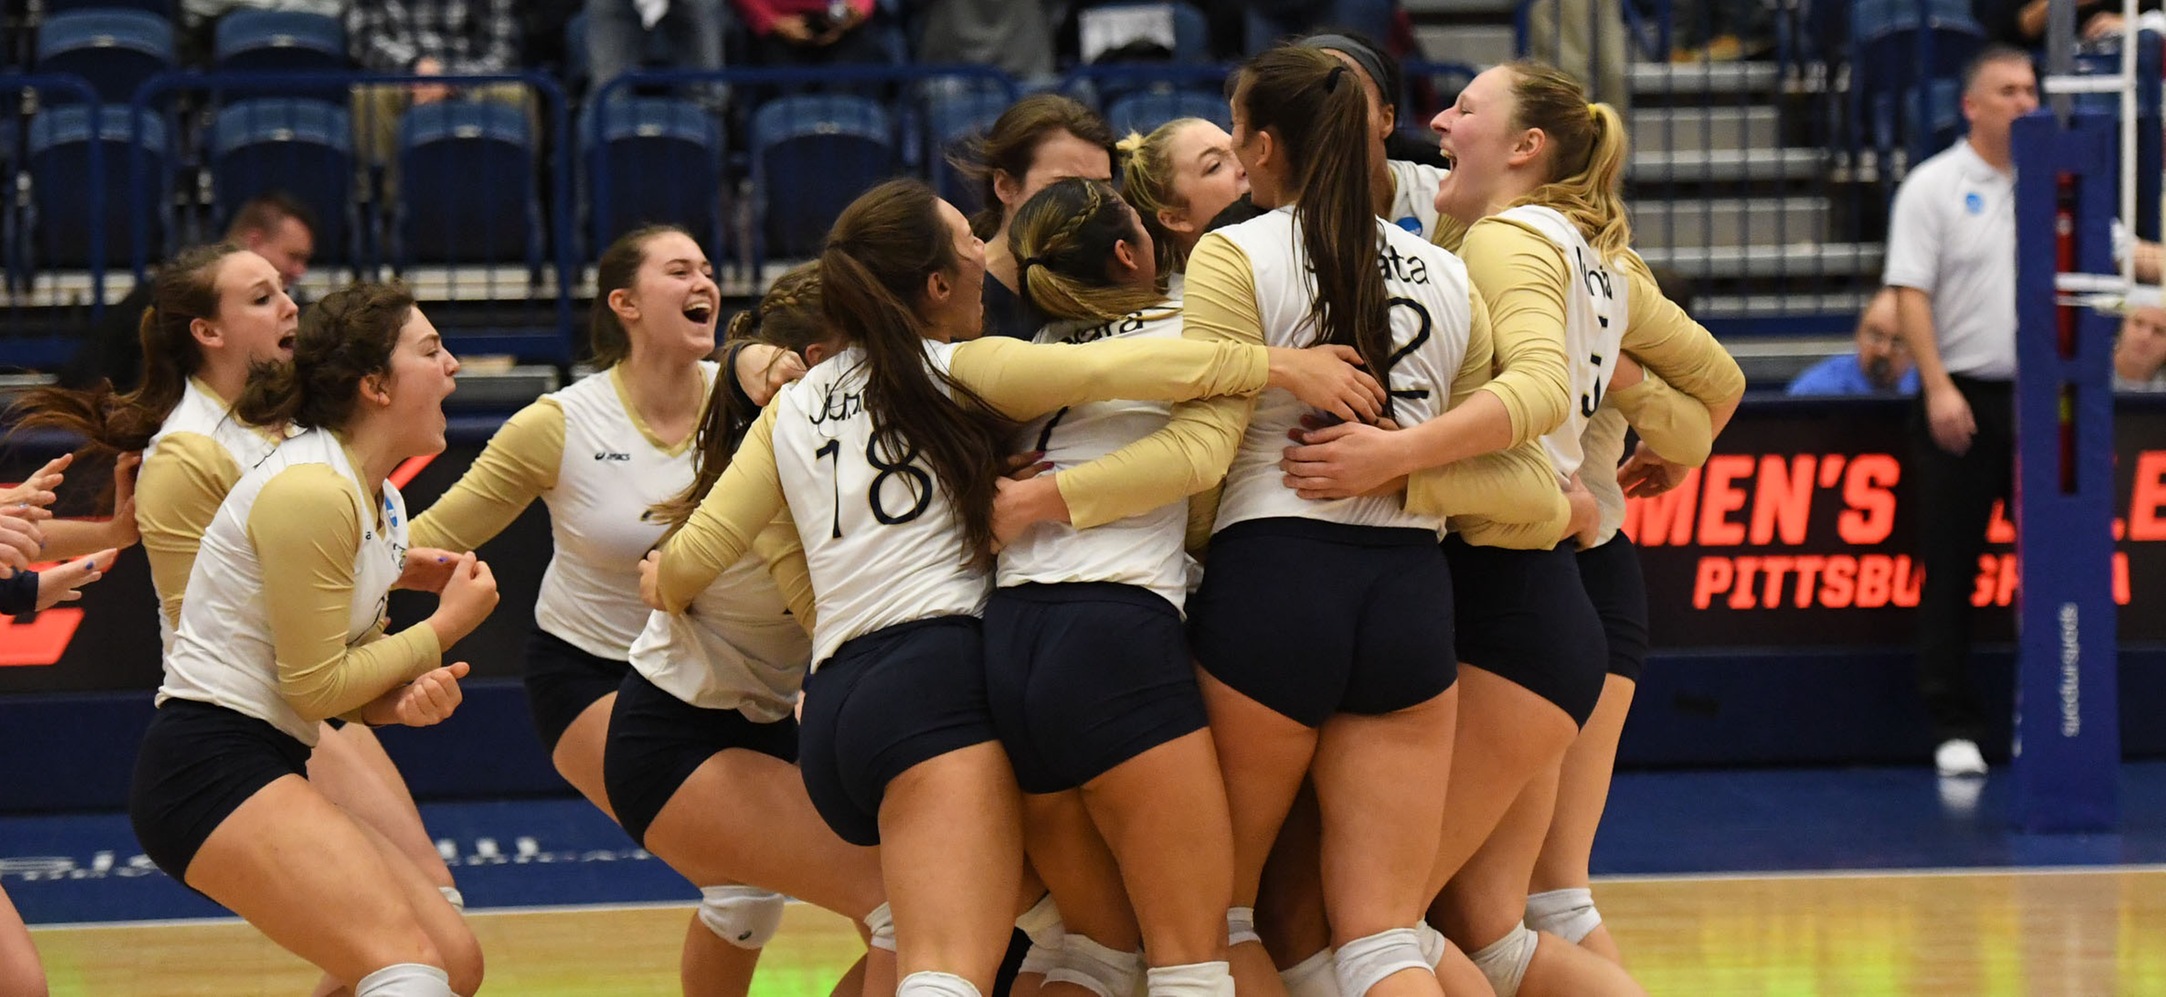 Women's Volleyball is excited to move on.